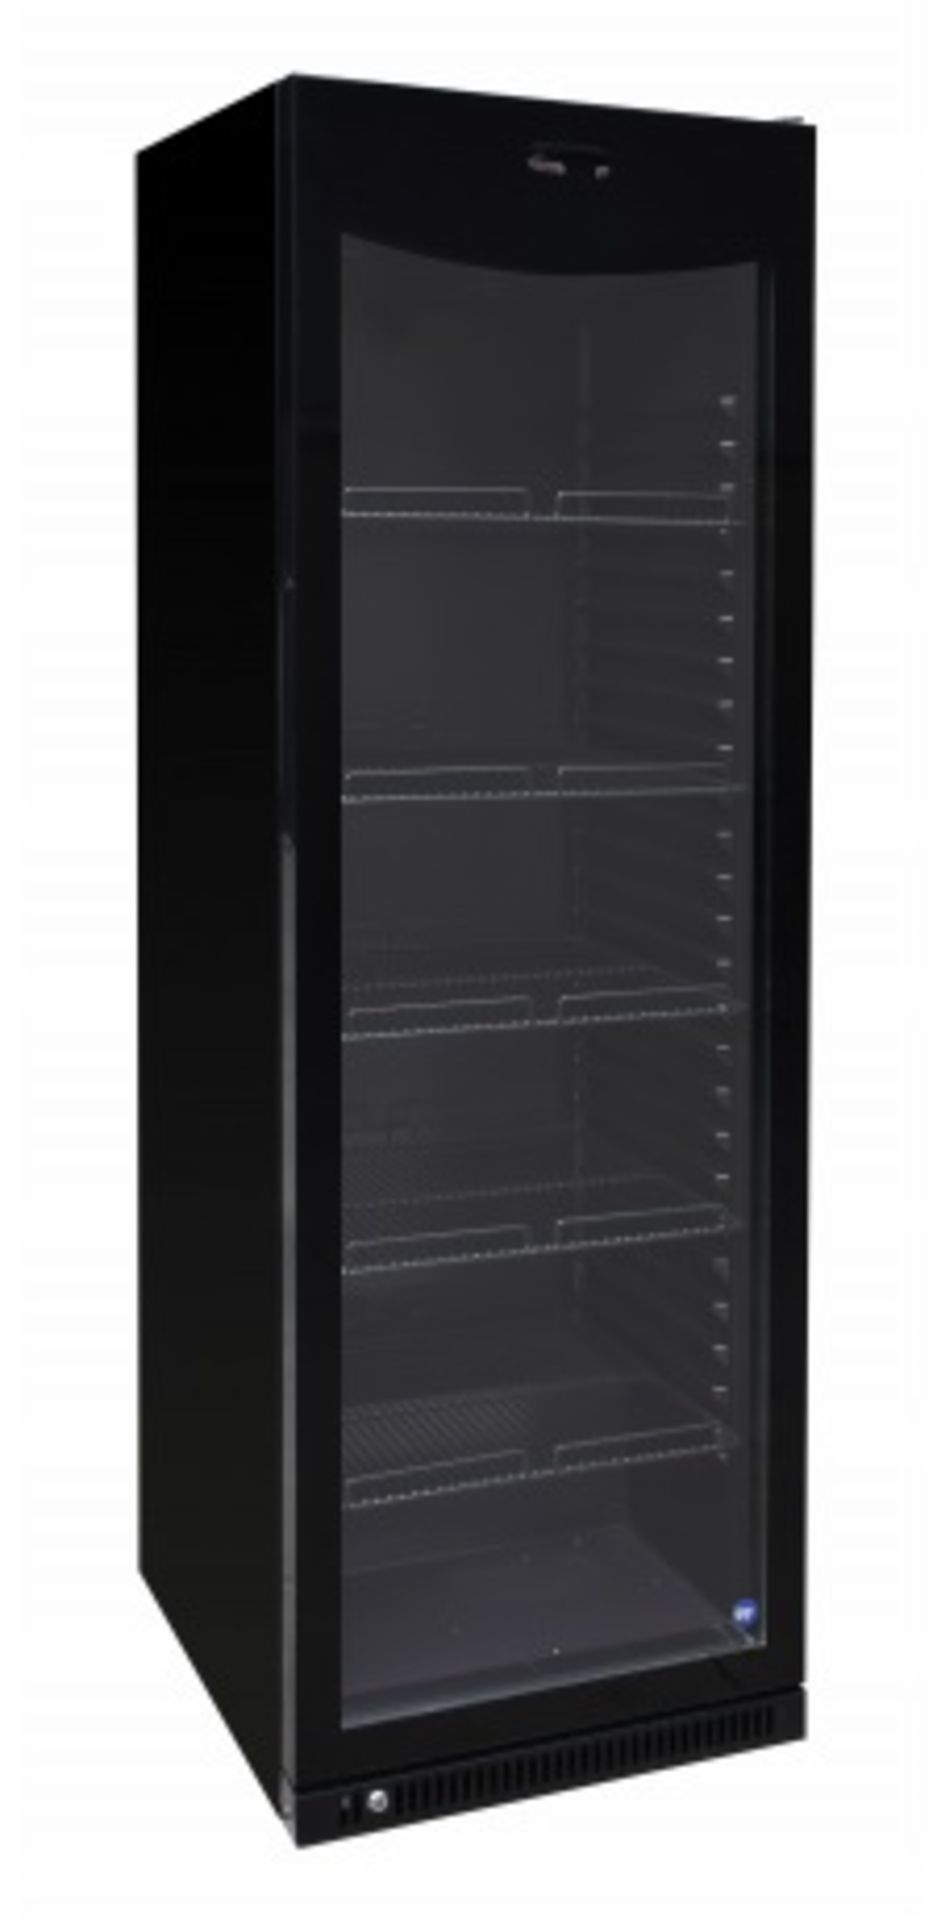 1 x Iarp Sun 42.3 Black Wine Cooler With Vertical LED Lights - Brand New Boxed Stock - Approx RRP £